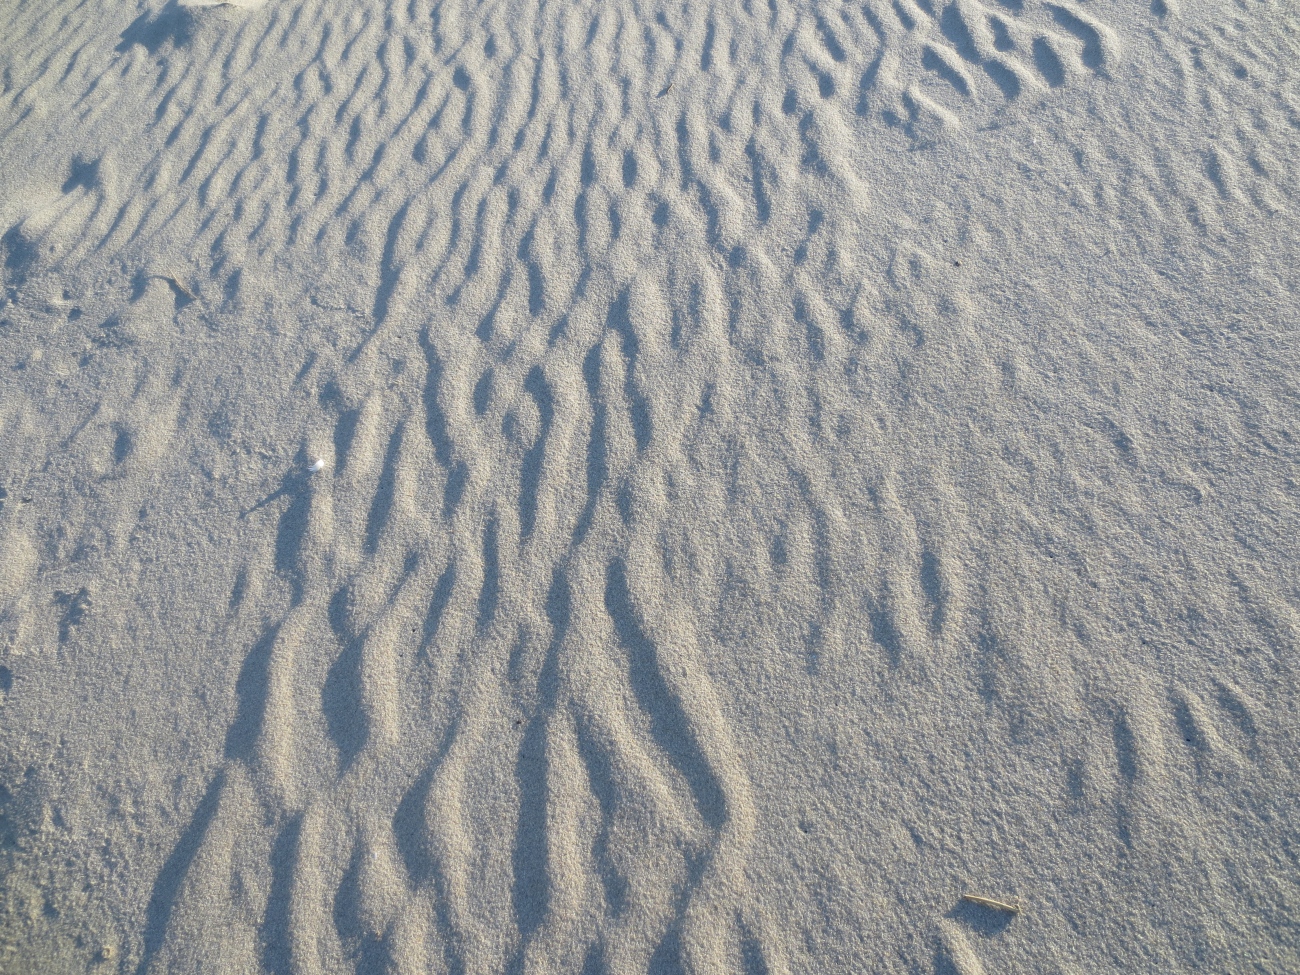 Sand dunes in the Sahara or inch-high ripple pattern in sand of AssateagueIsland?  The latter